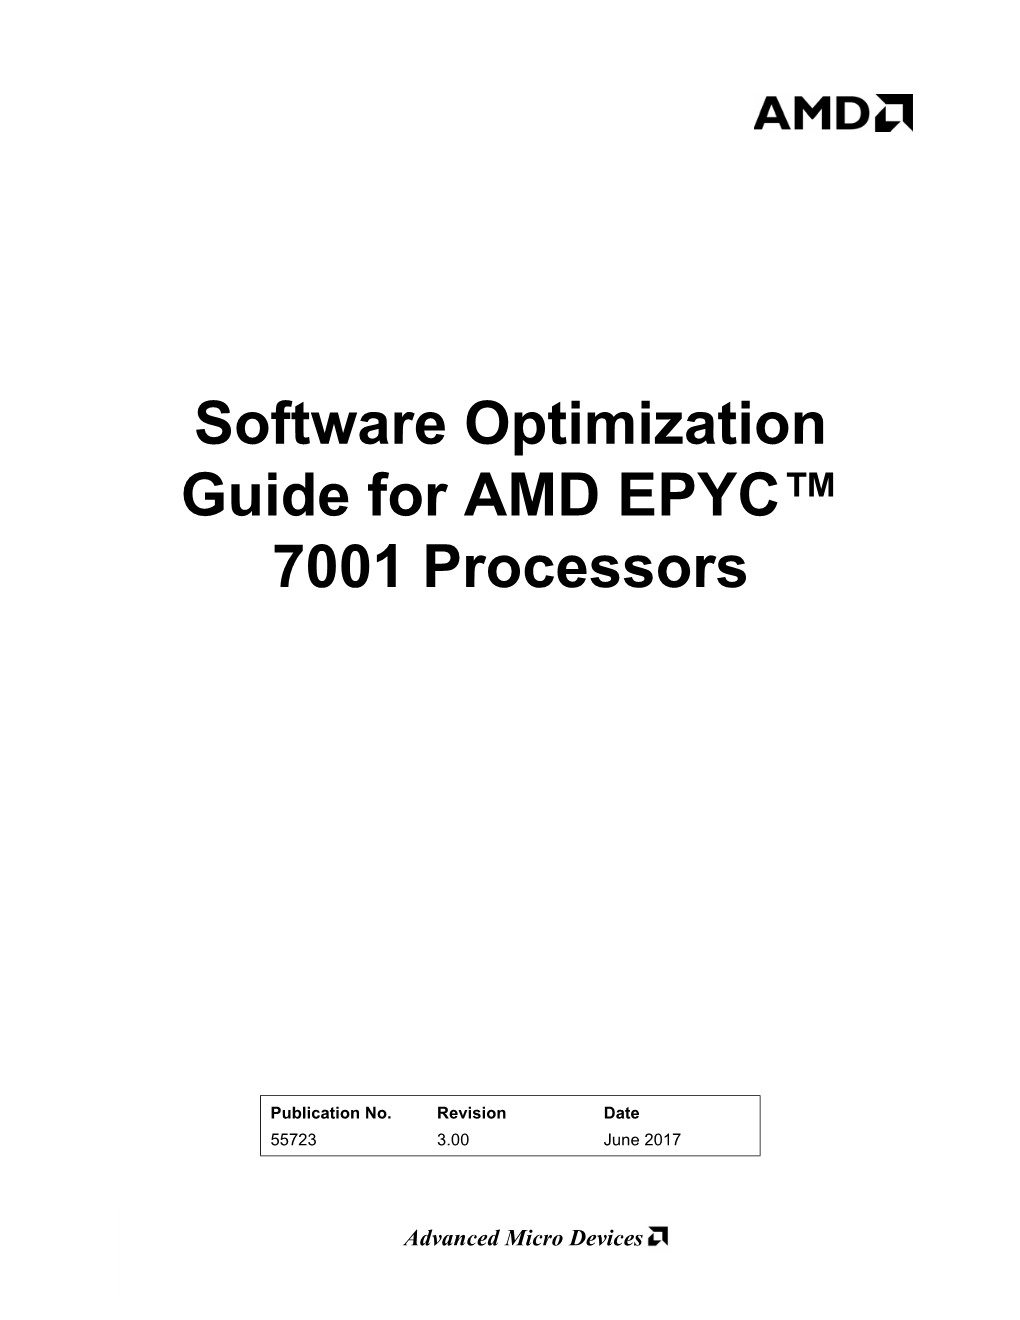 Software Optimization Guide for AMD Family 17H Processors